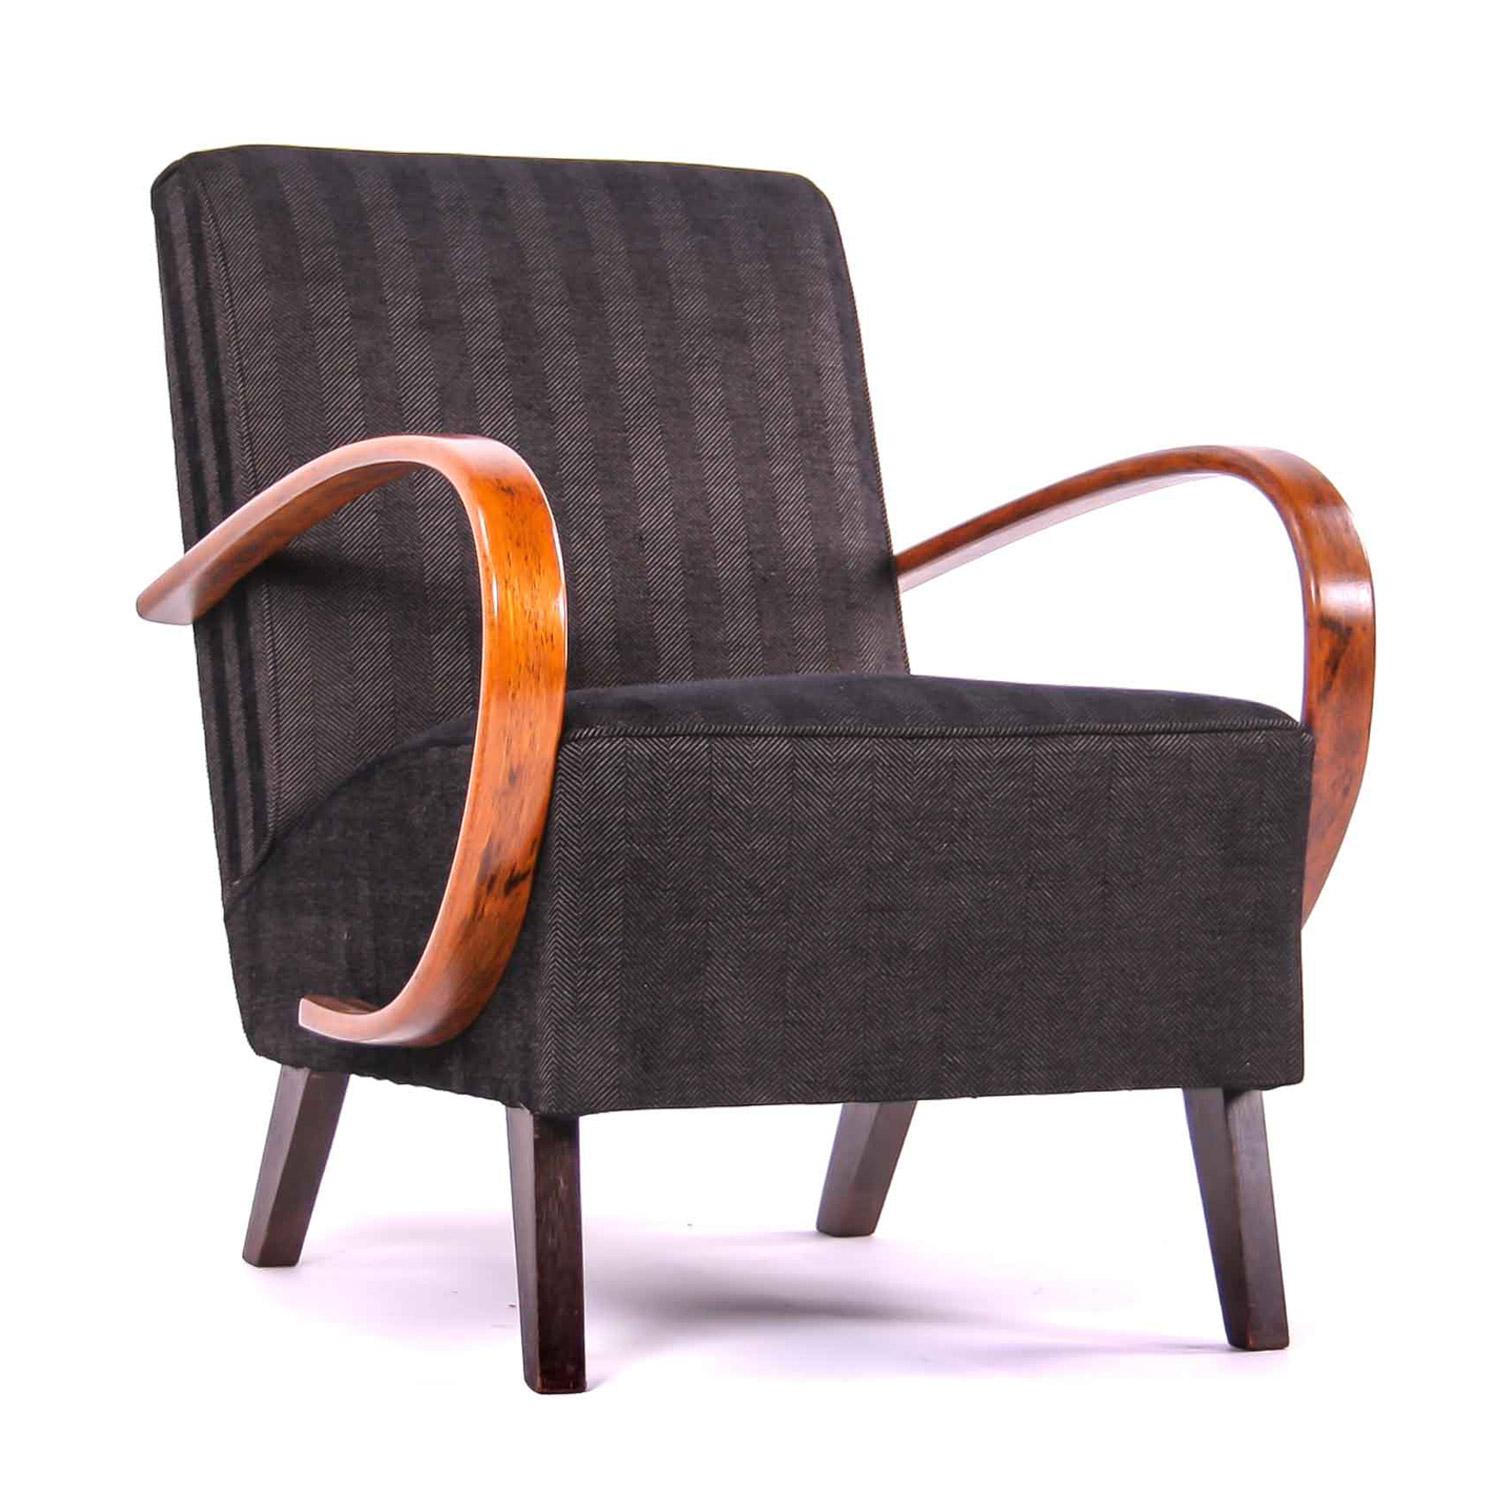 Original piece of furniture after renovation.
A very comfortable and practical chair that finds space in any space. Precise refurbishment and the highest quality materials guarantee long-term durability of the chair. Ideal for men's room.

 